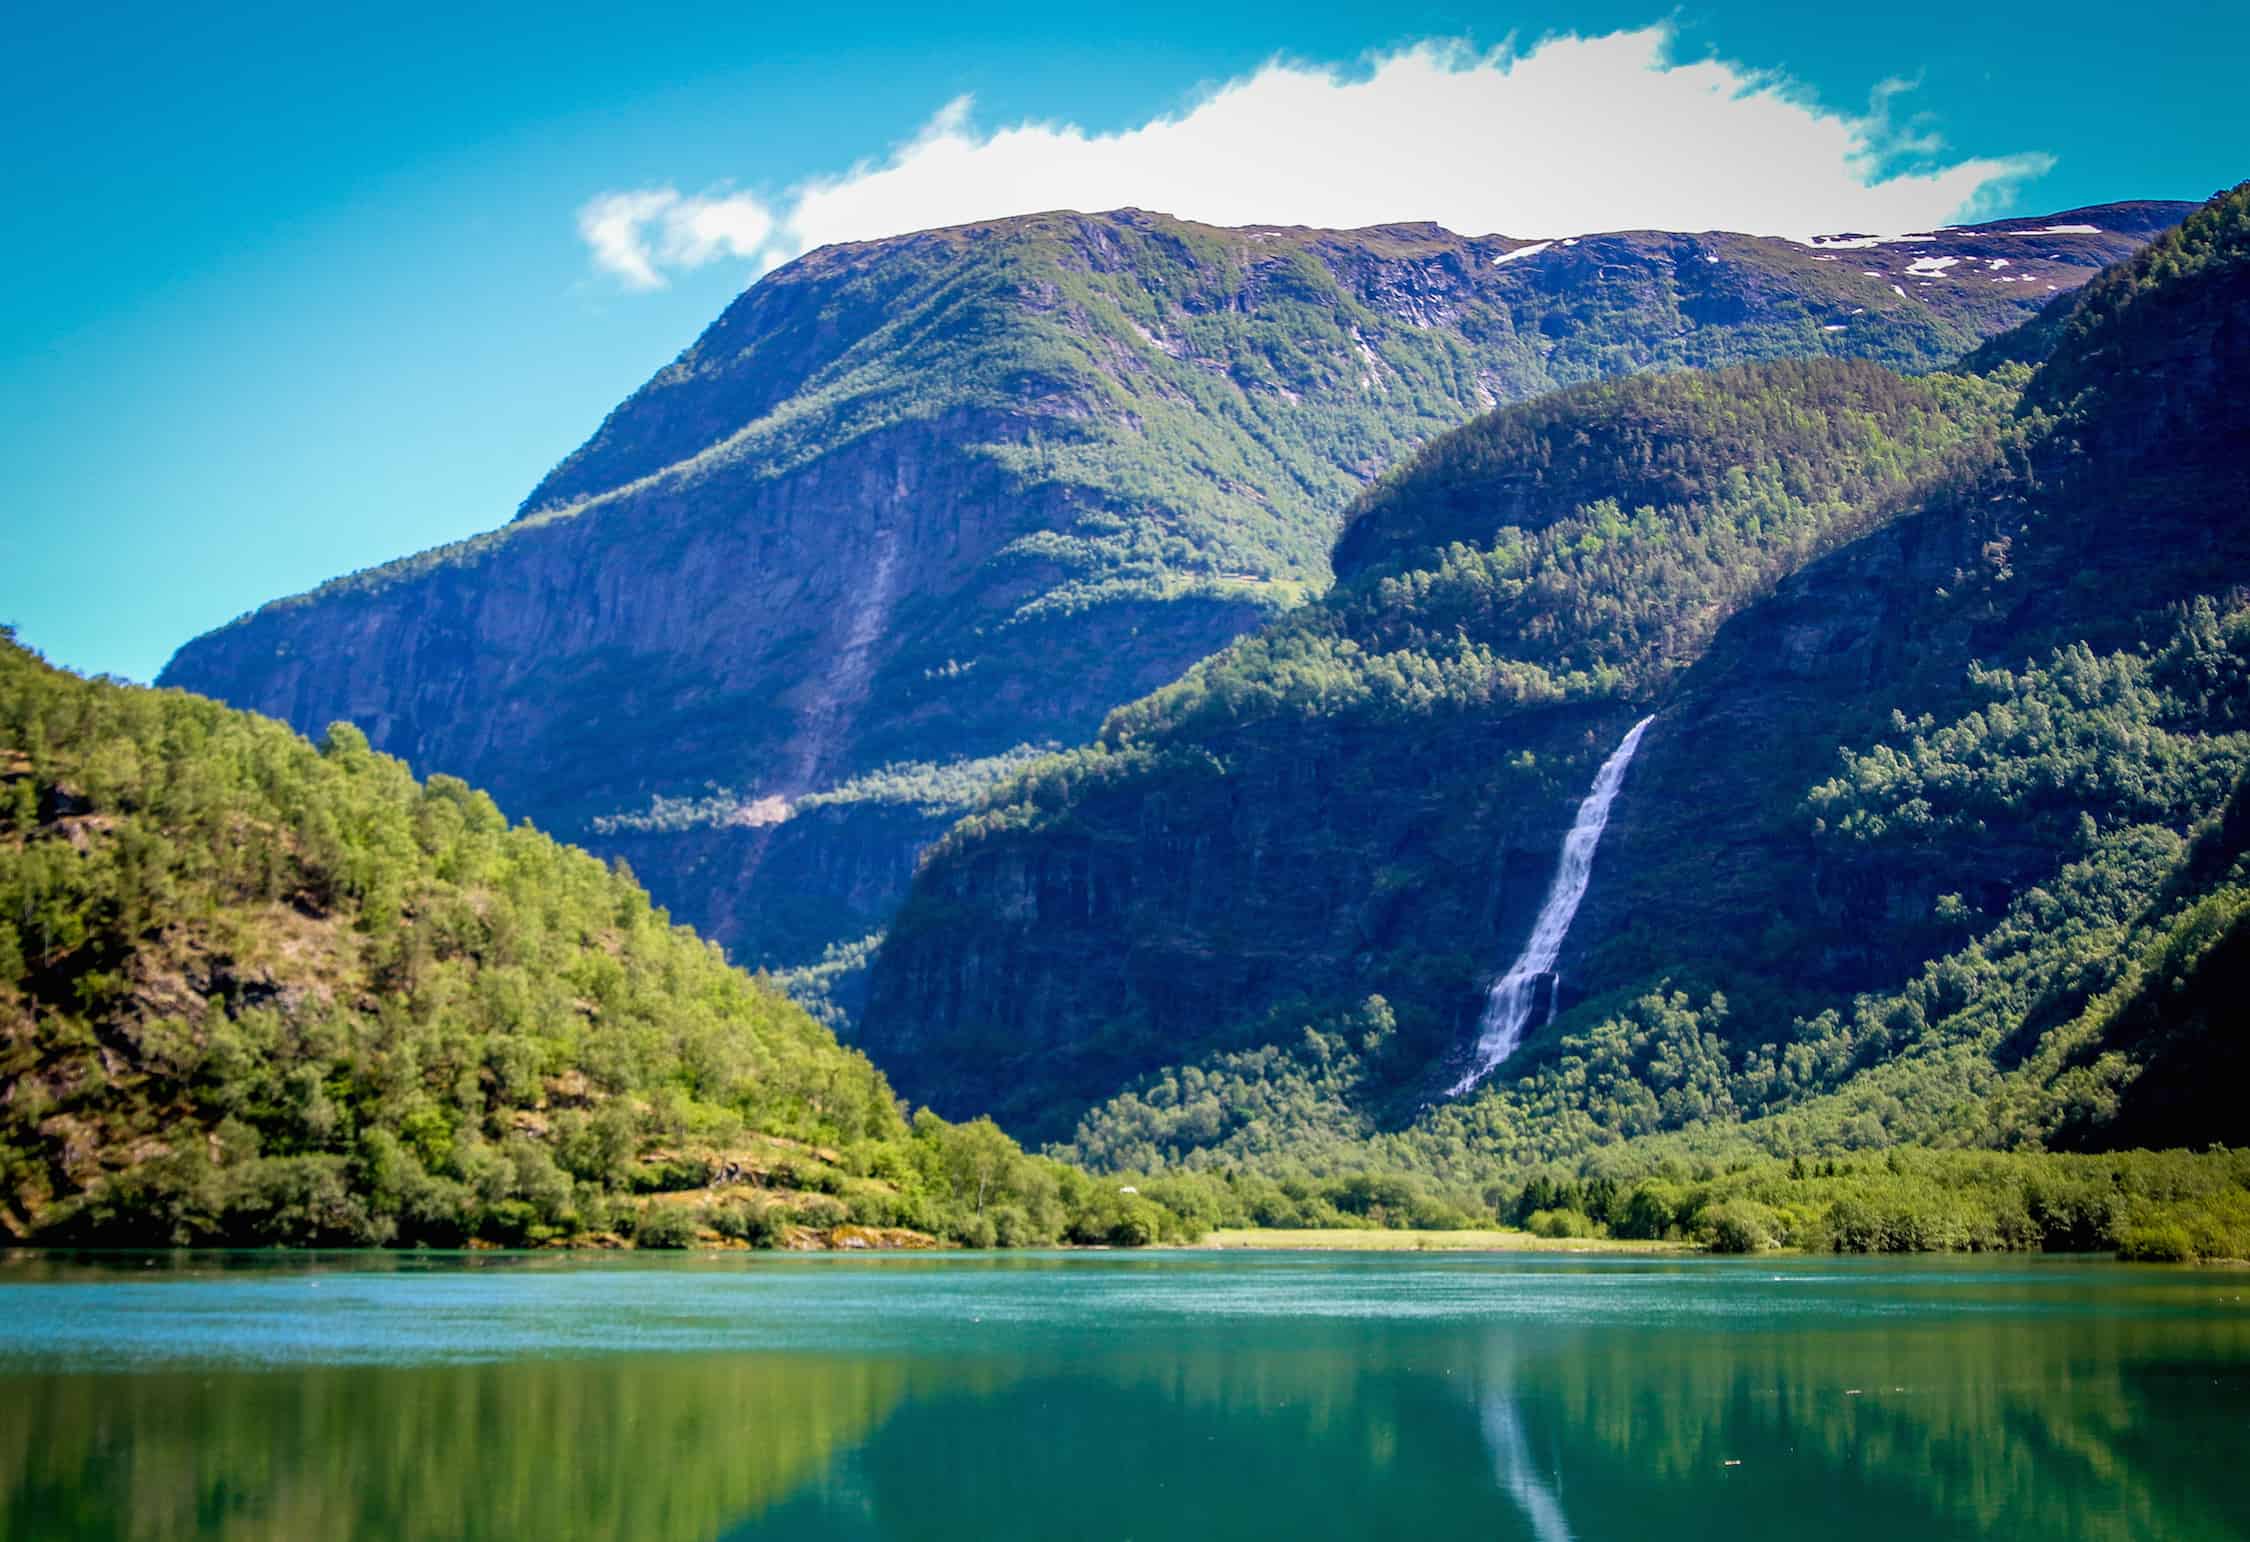 Fjords of Norway: Sognefjellet National Tourist Route